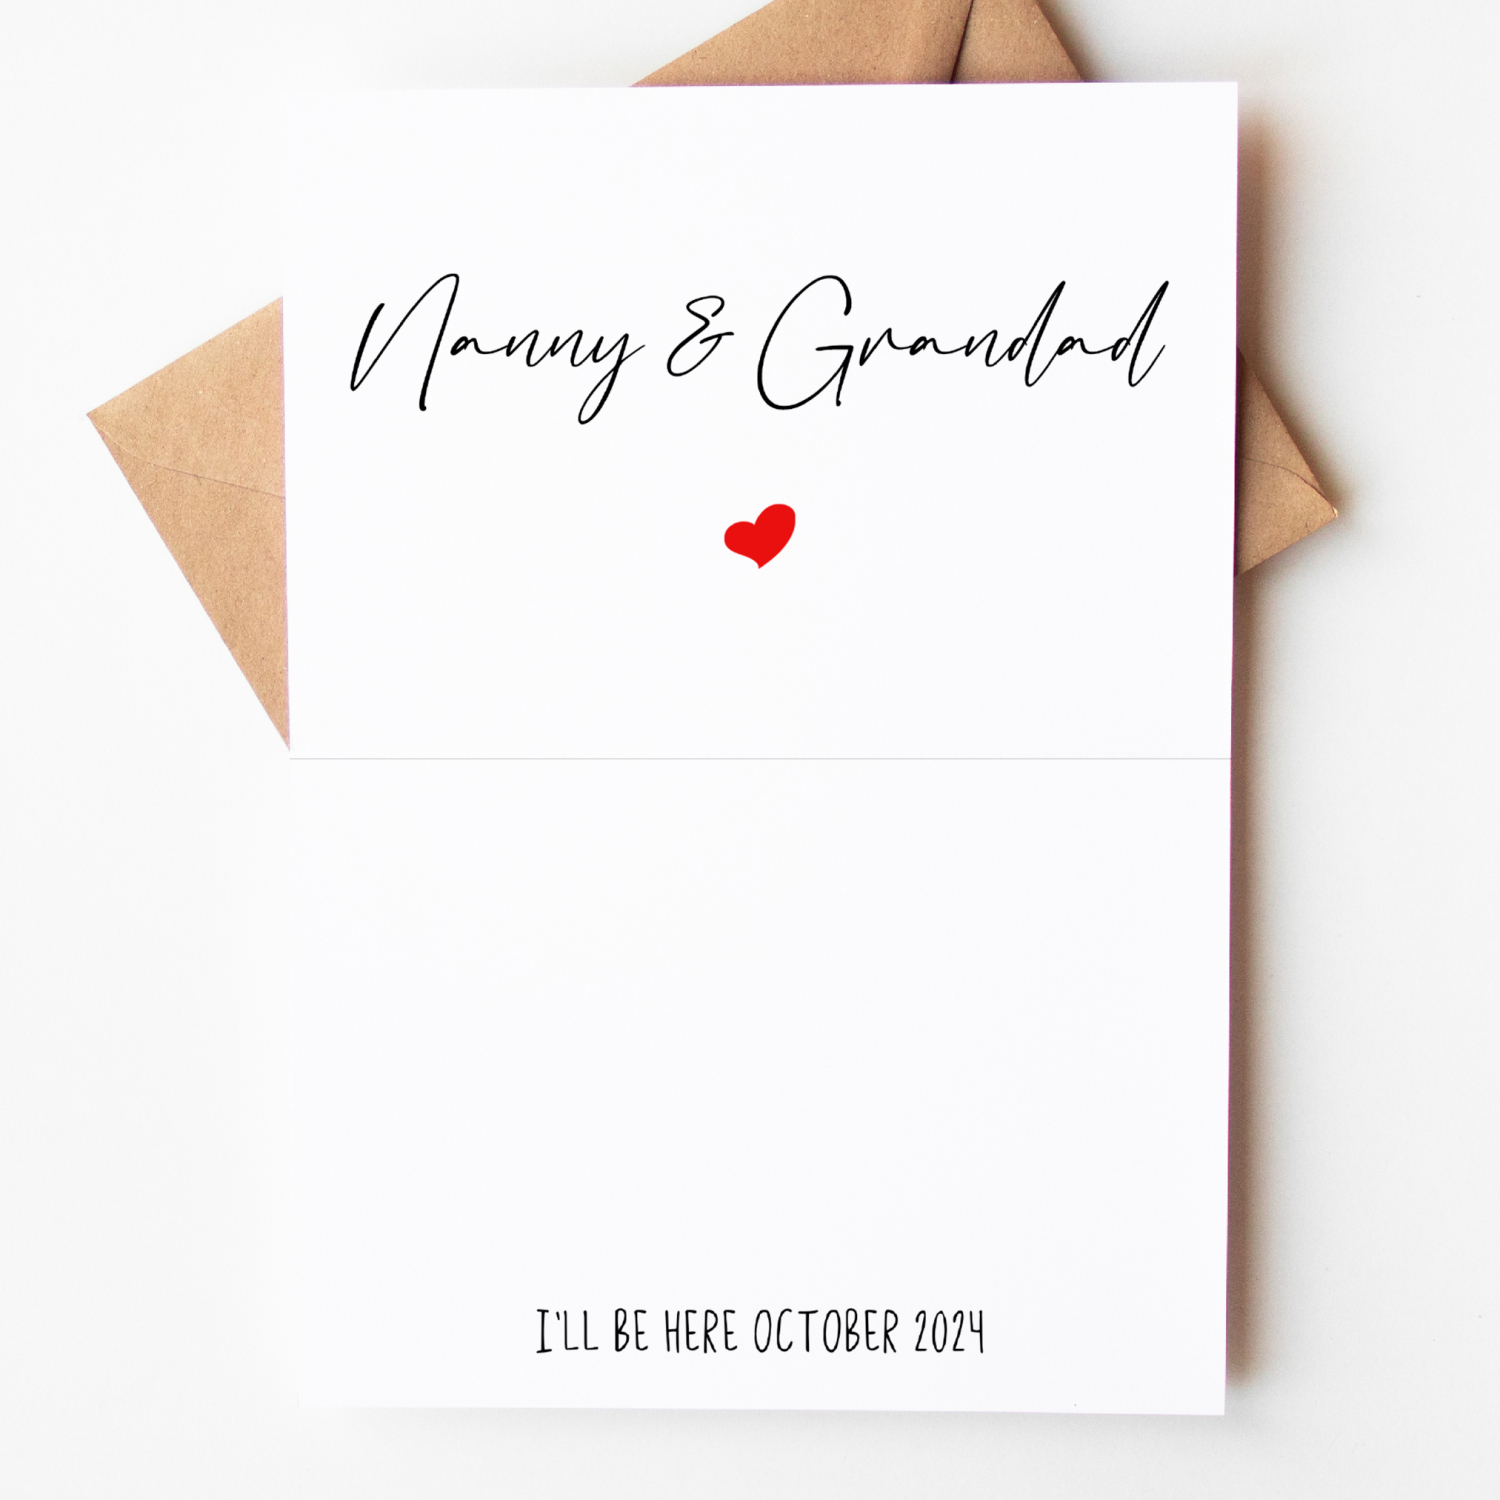 Coming Soon, Baby Stroller Pregnancy Reveal Cards - A6 - 4.1" x 5.8"